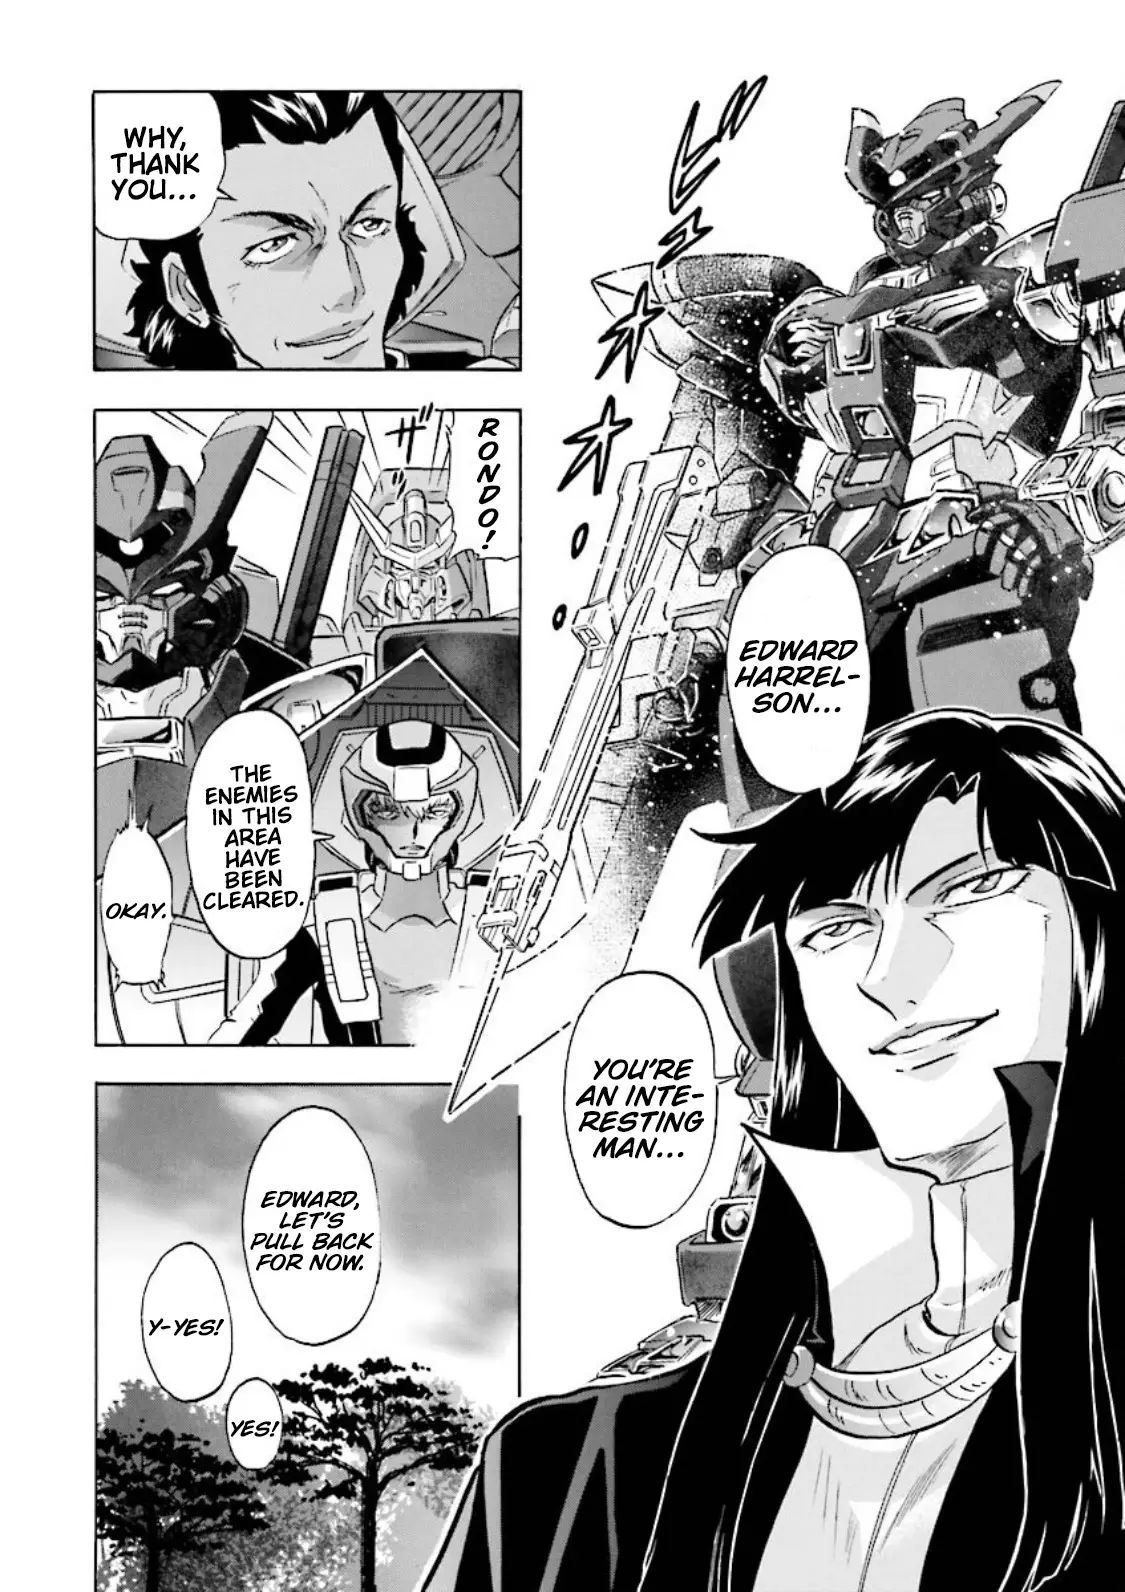 Mobile Suit Gundam Seed Astray Re:master Edition - 13 page 9-541b80af